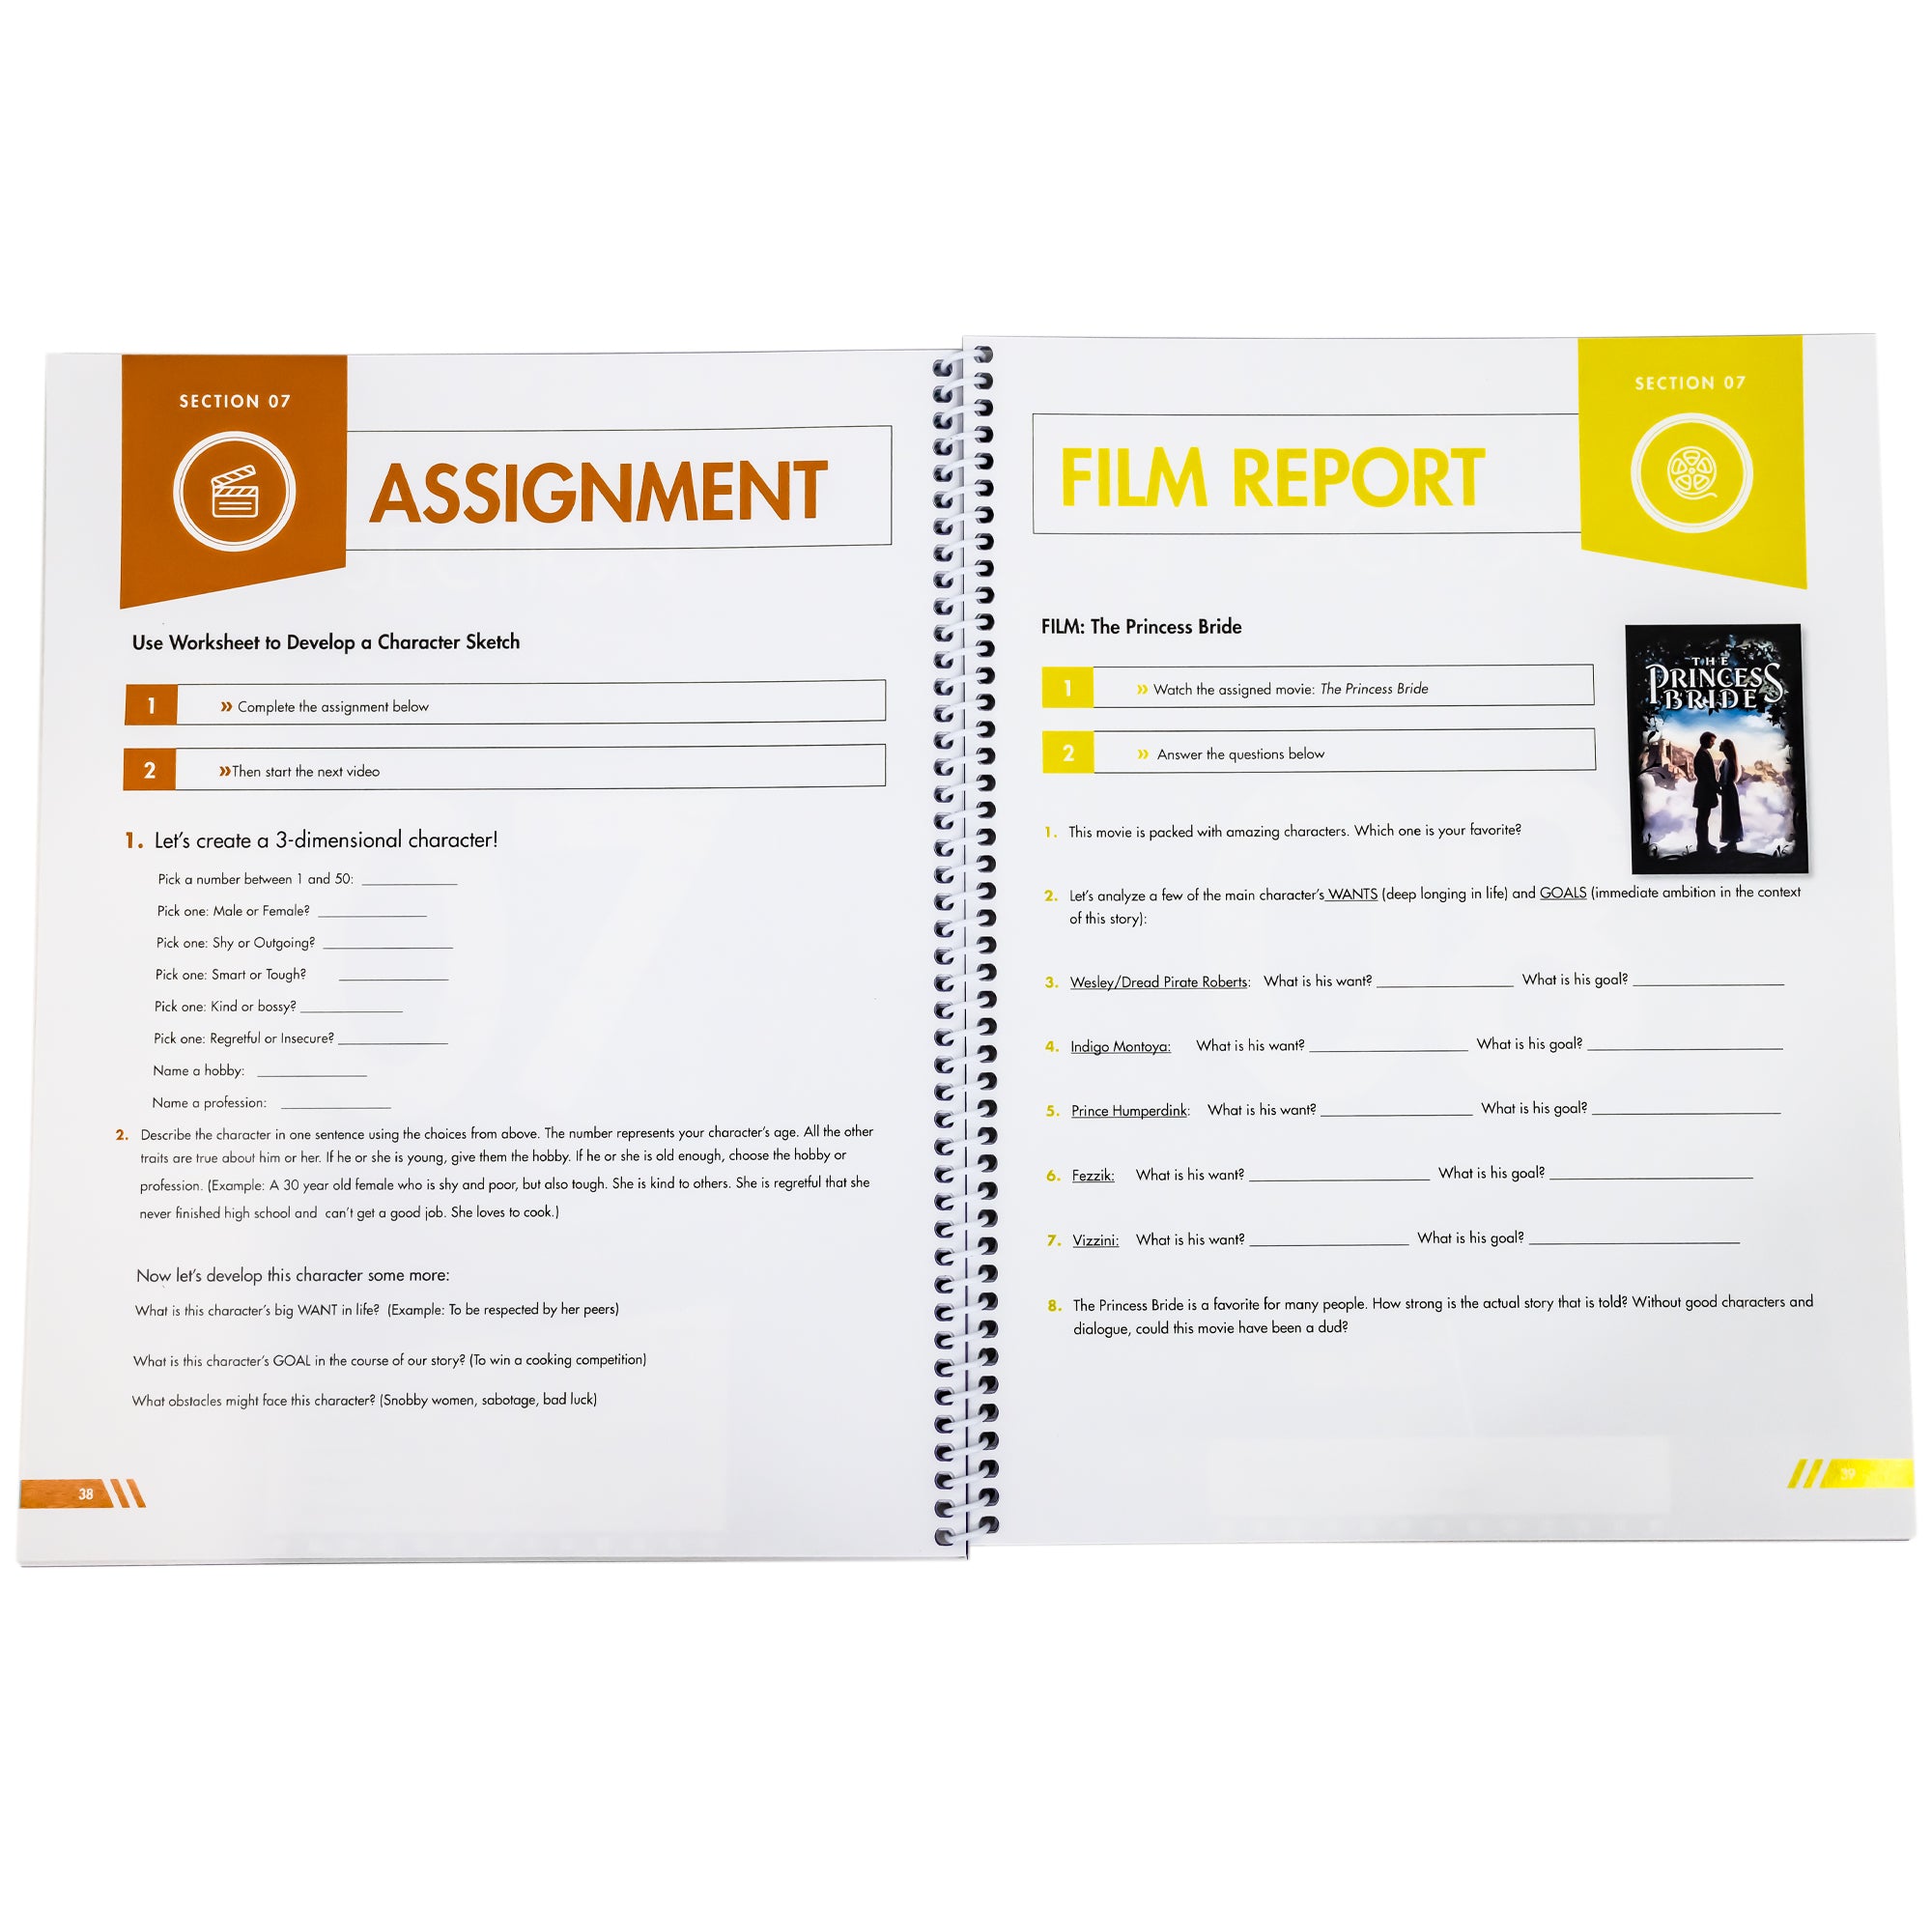 The spiral bound Intro to Filmmaking is open to show the "Assignment" on the left page that will have you "develop a character sketch." On the right page is a "Film Report" that will have you watch "The Princess Bride" and answer questions about the film.